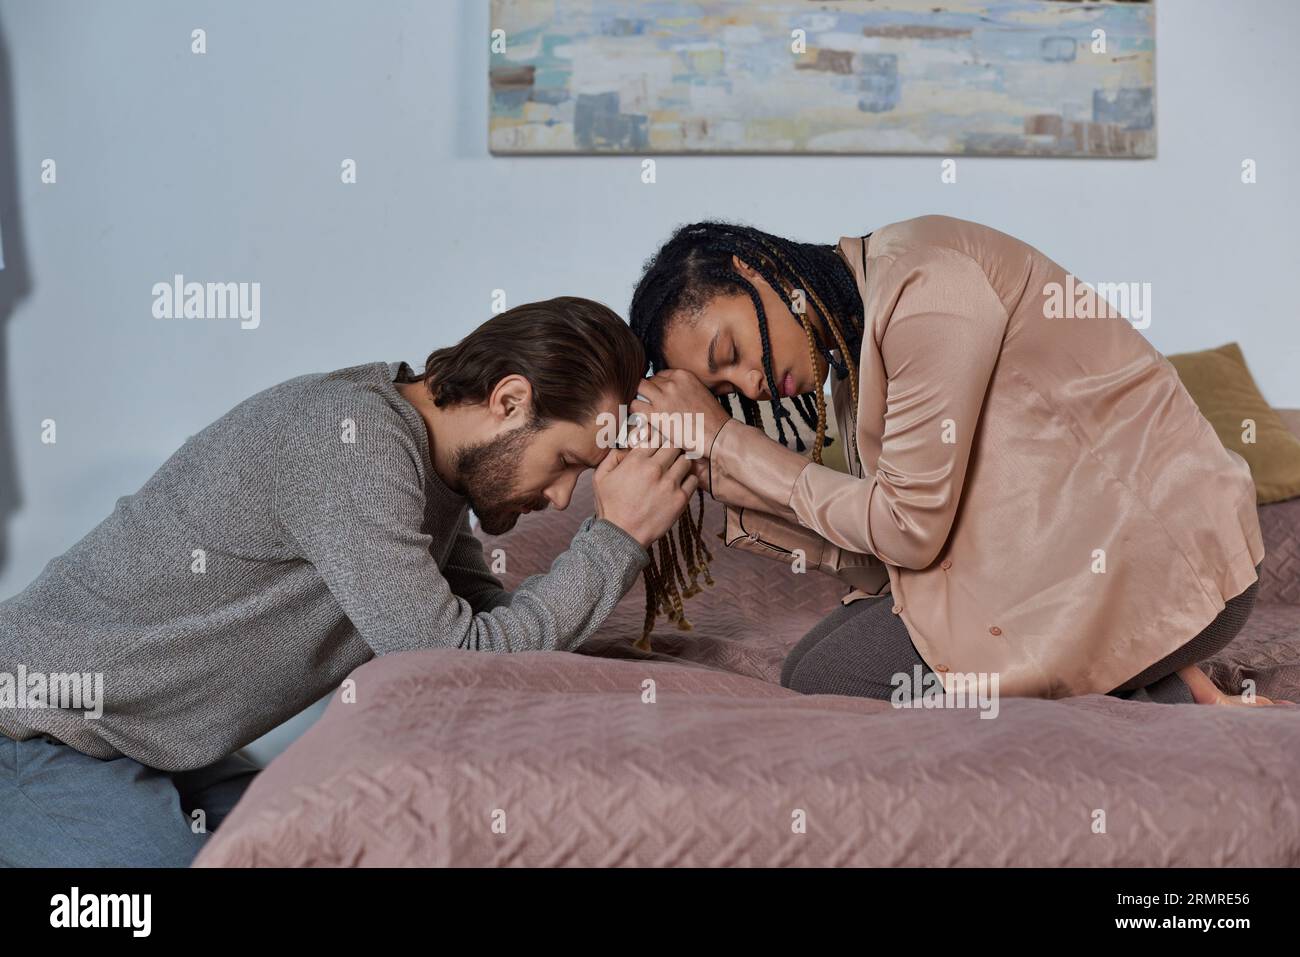 african american woman holding hands with man, worried multicultural couple bonding, empathy, trust Stock Photo